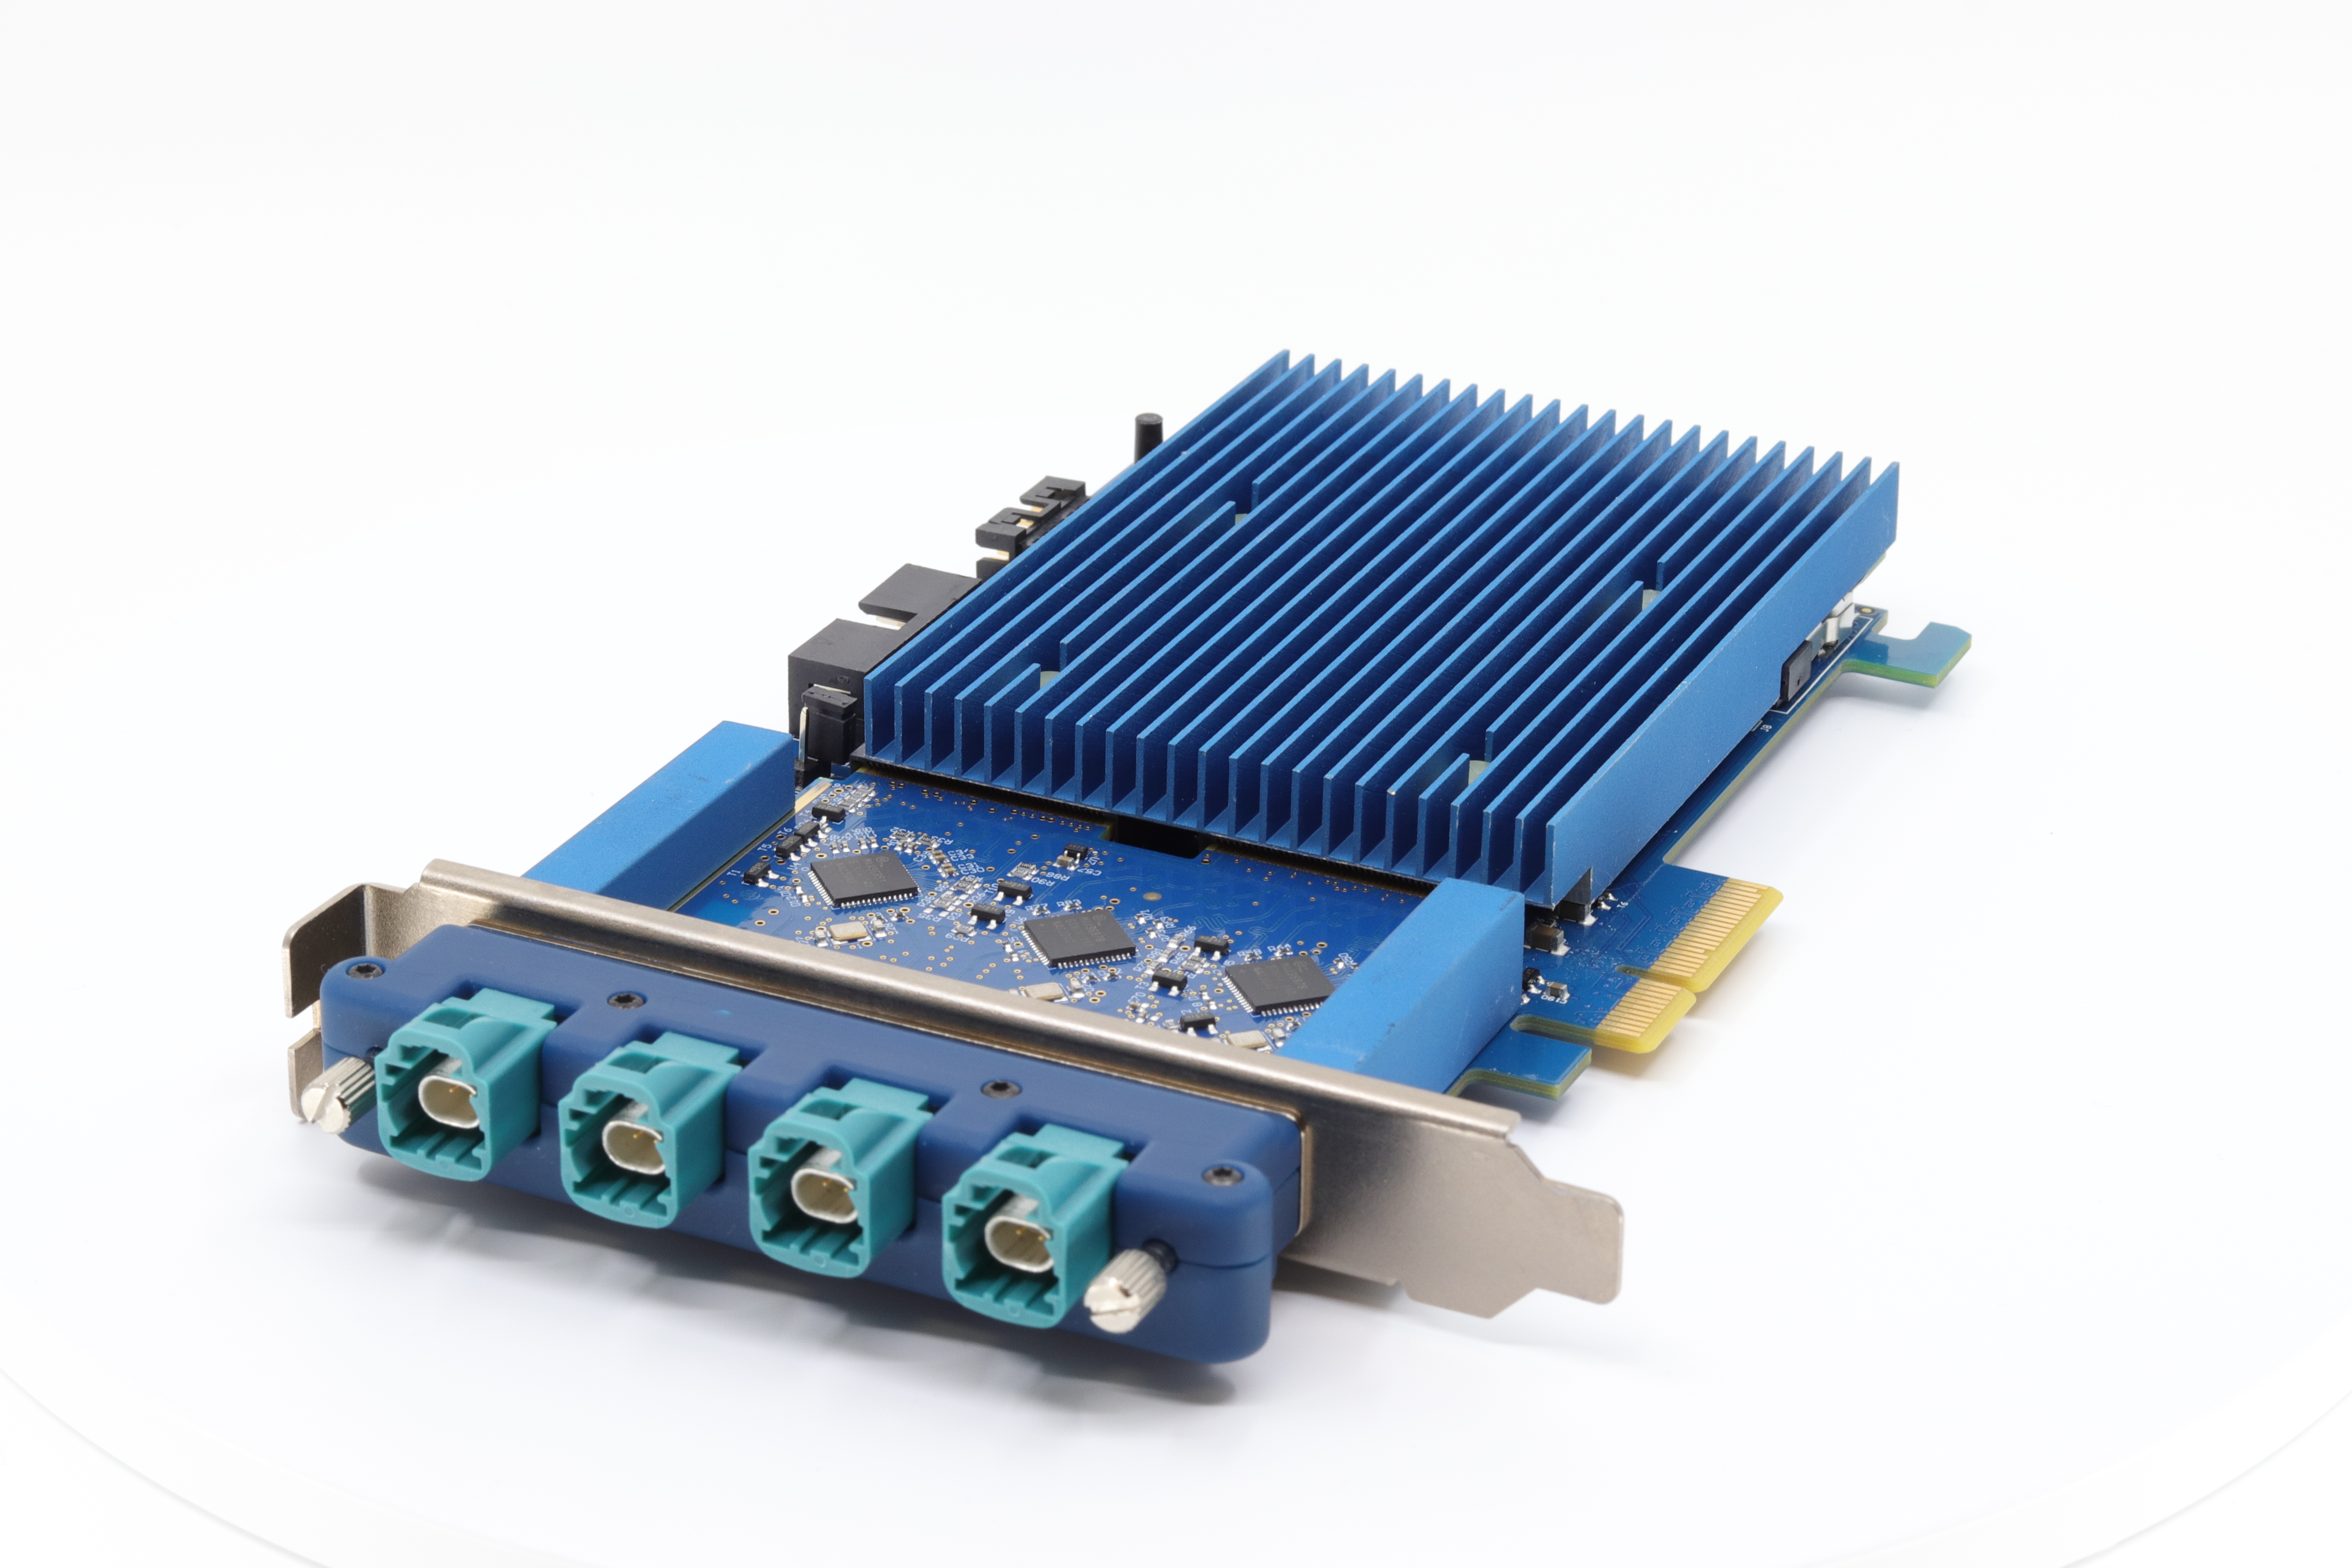 Framegrabber 4 PCIe card - the heart of the FG4 ecosystem